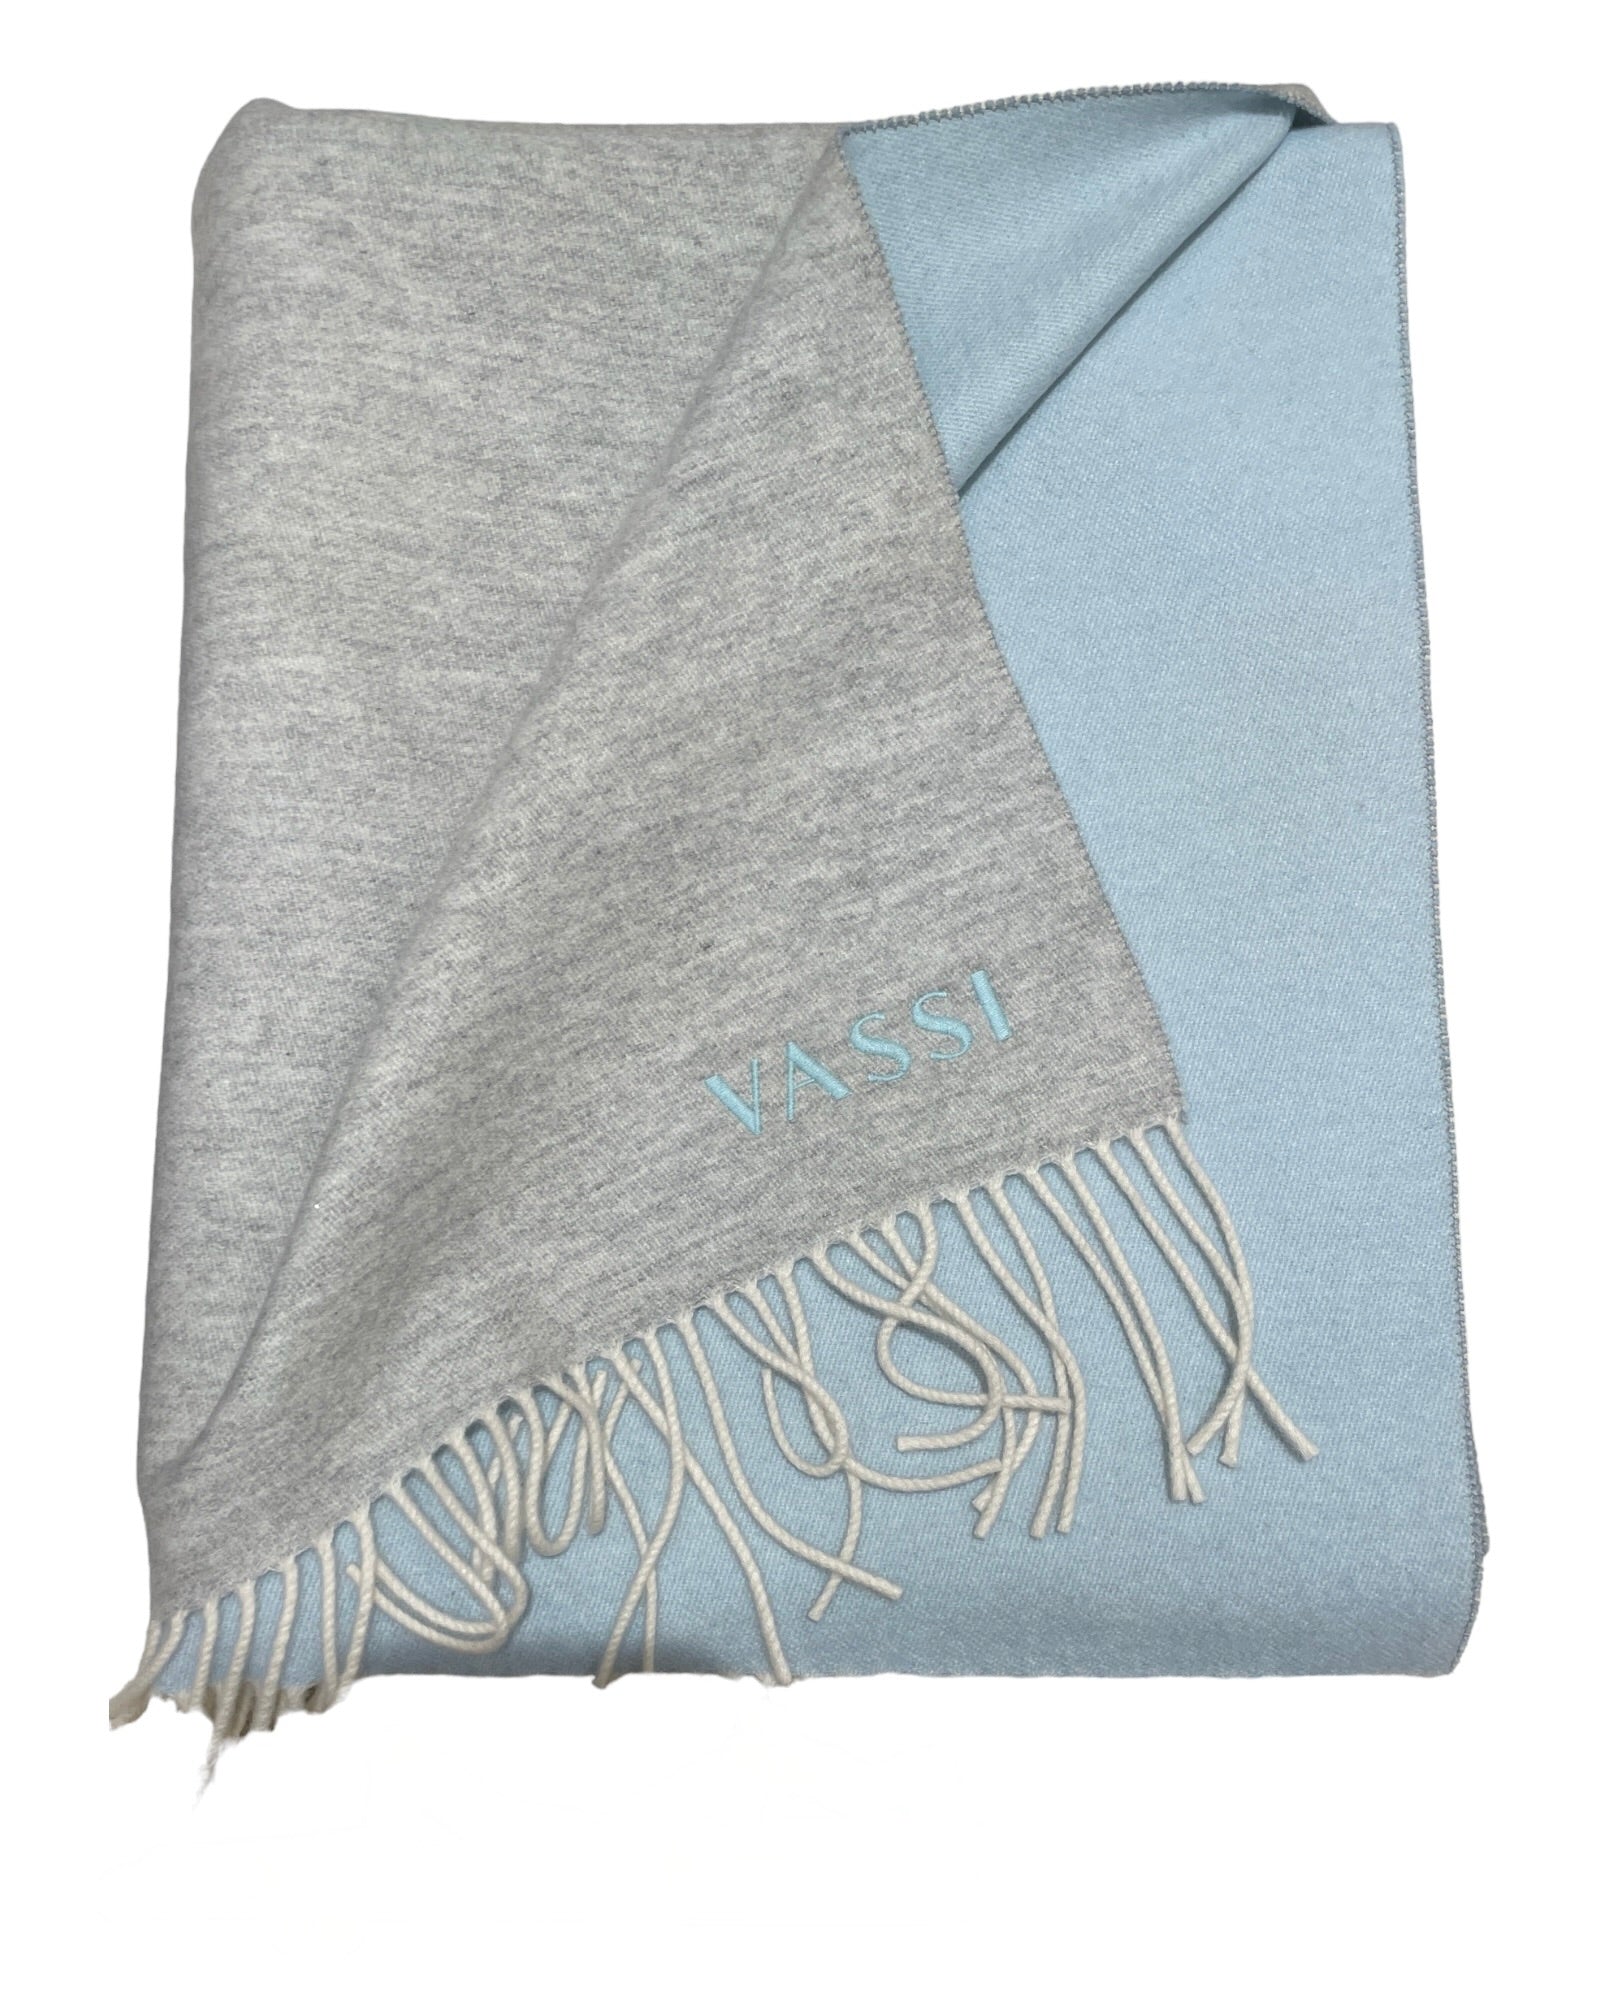 Reversible Cashmere Throw- Heather Grey, Baby Blue BLANKETS